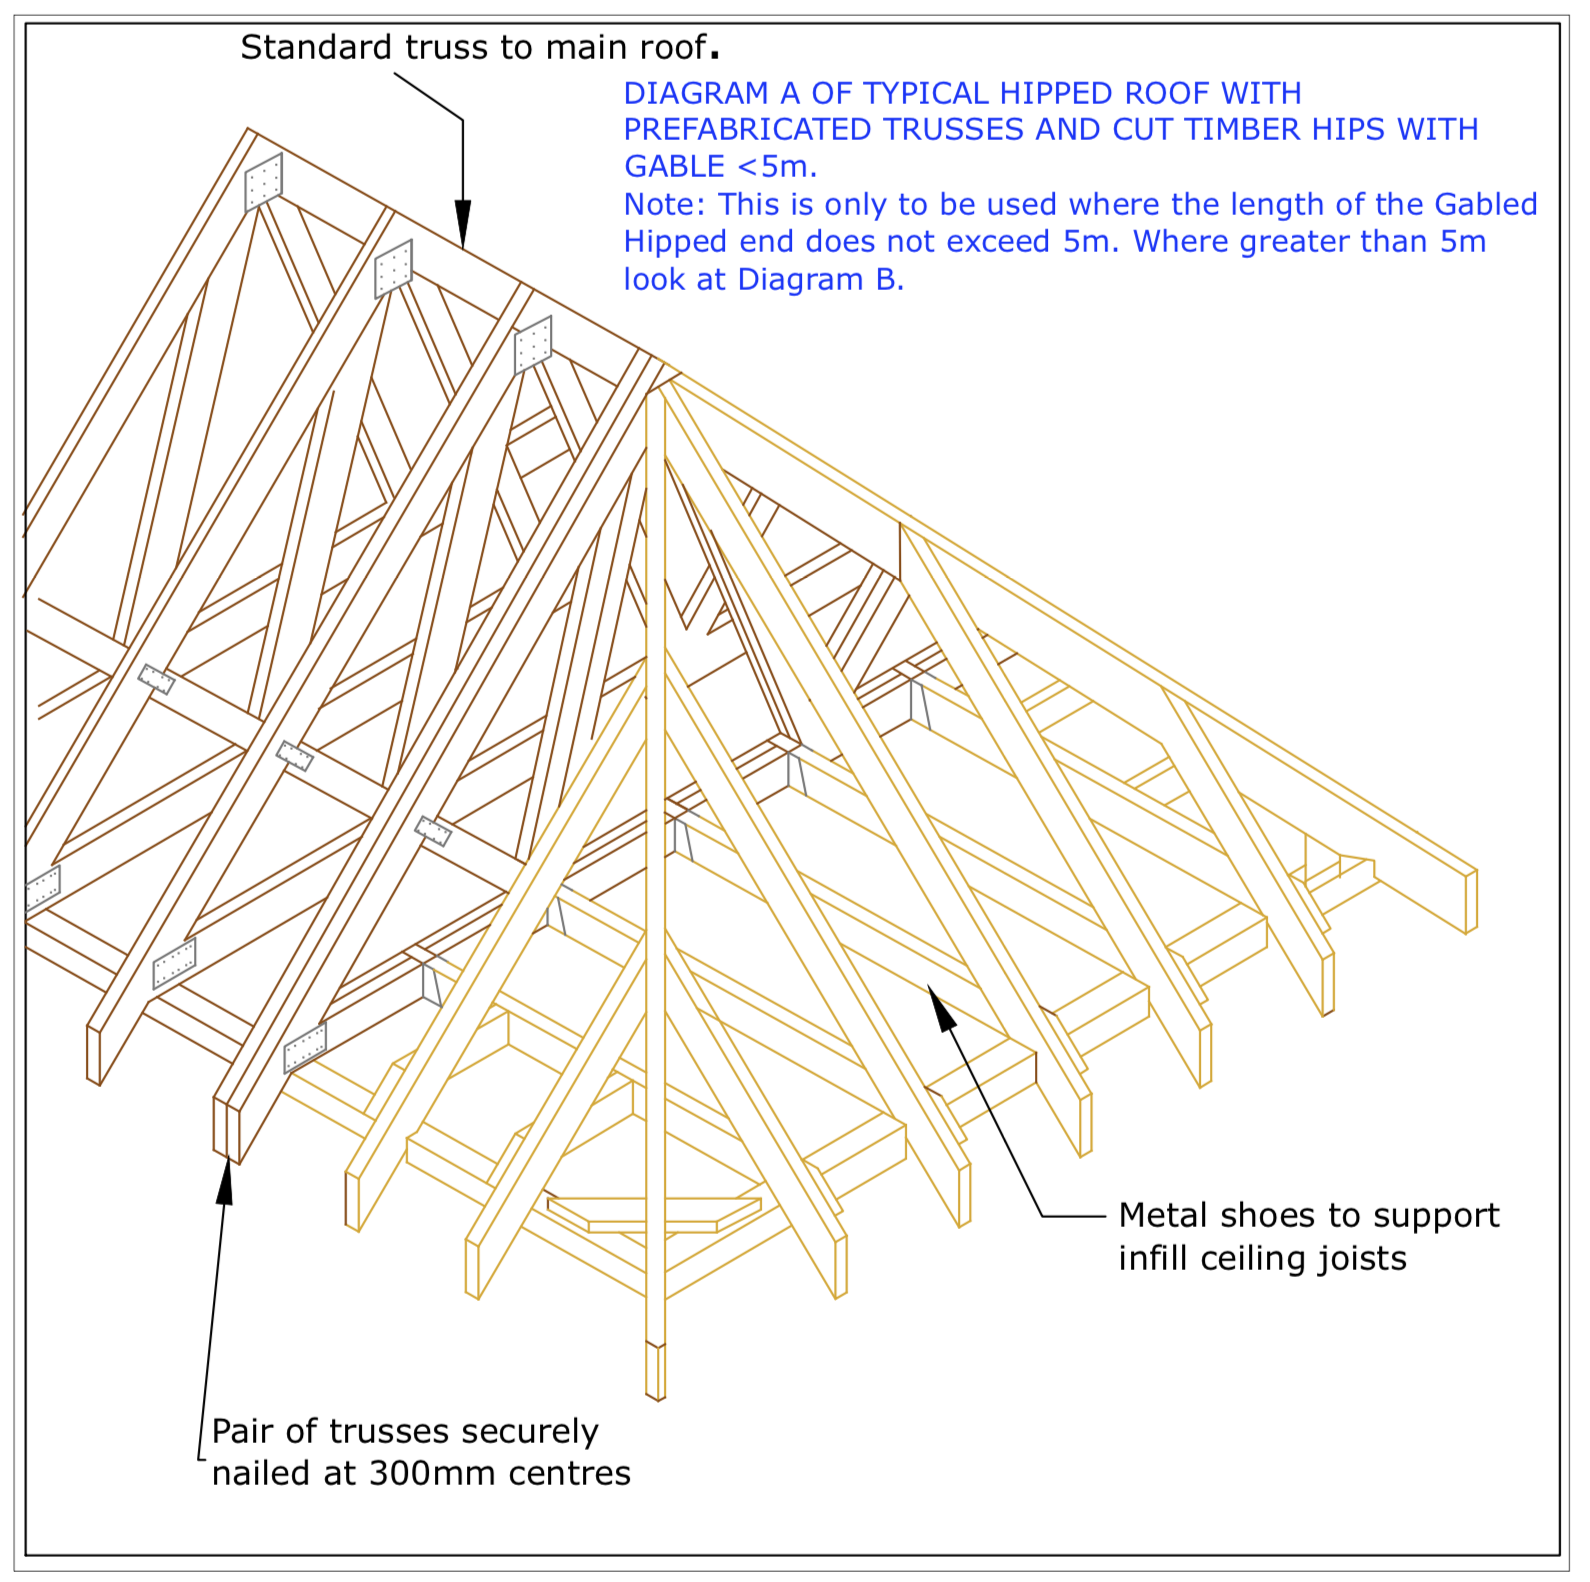 DIAGRAM D27  Hipped End on Gable less than 5m in length